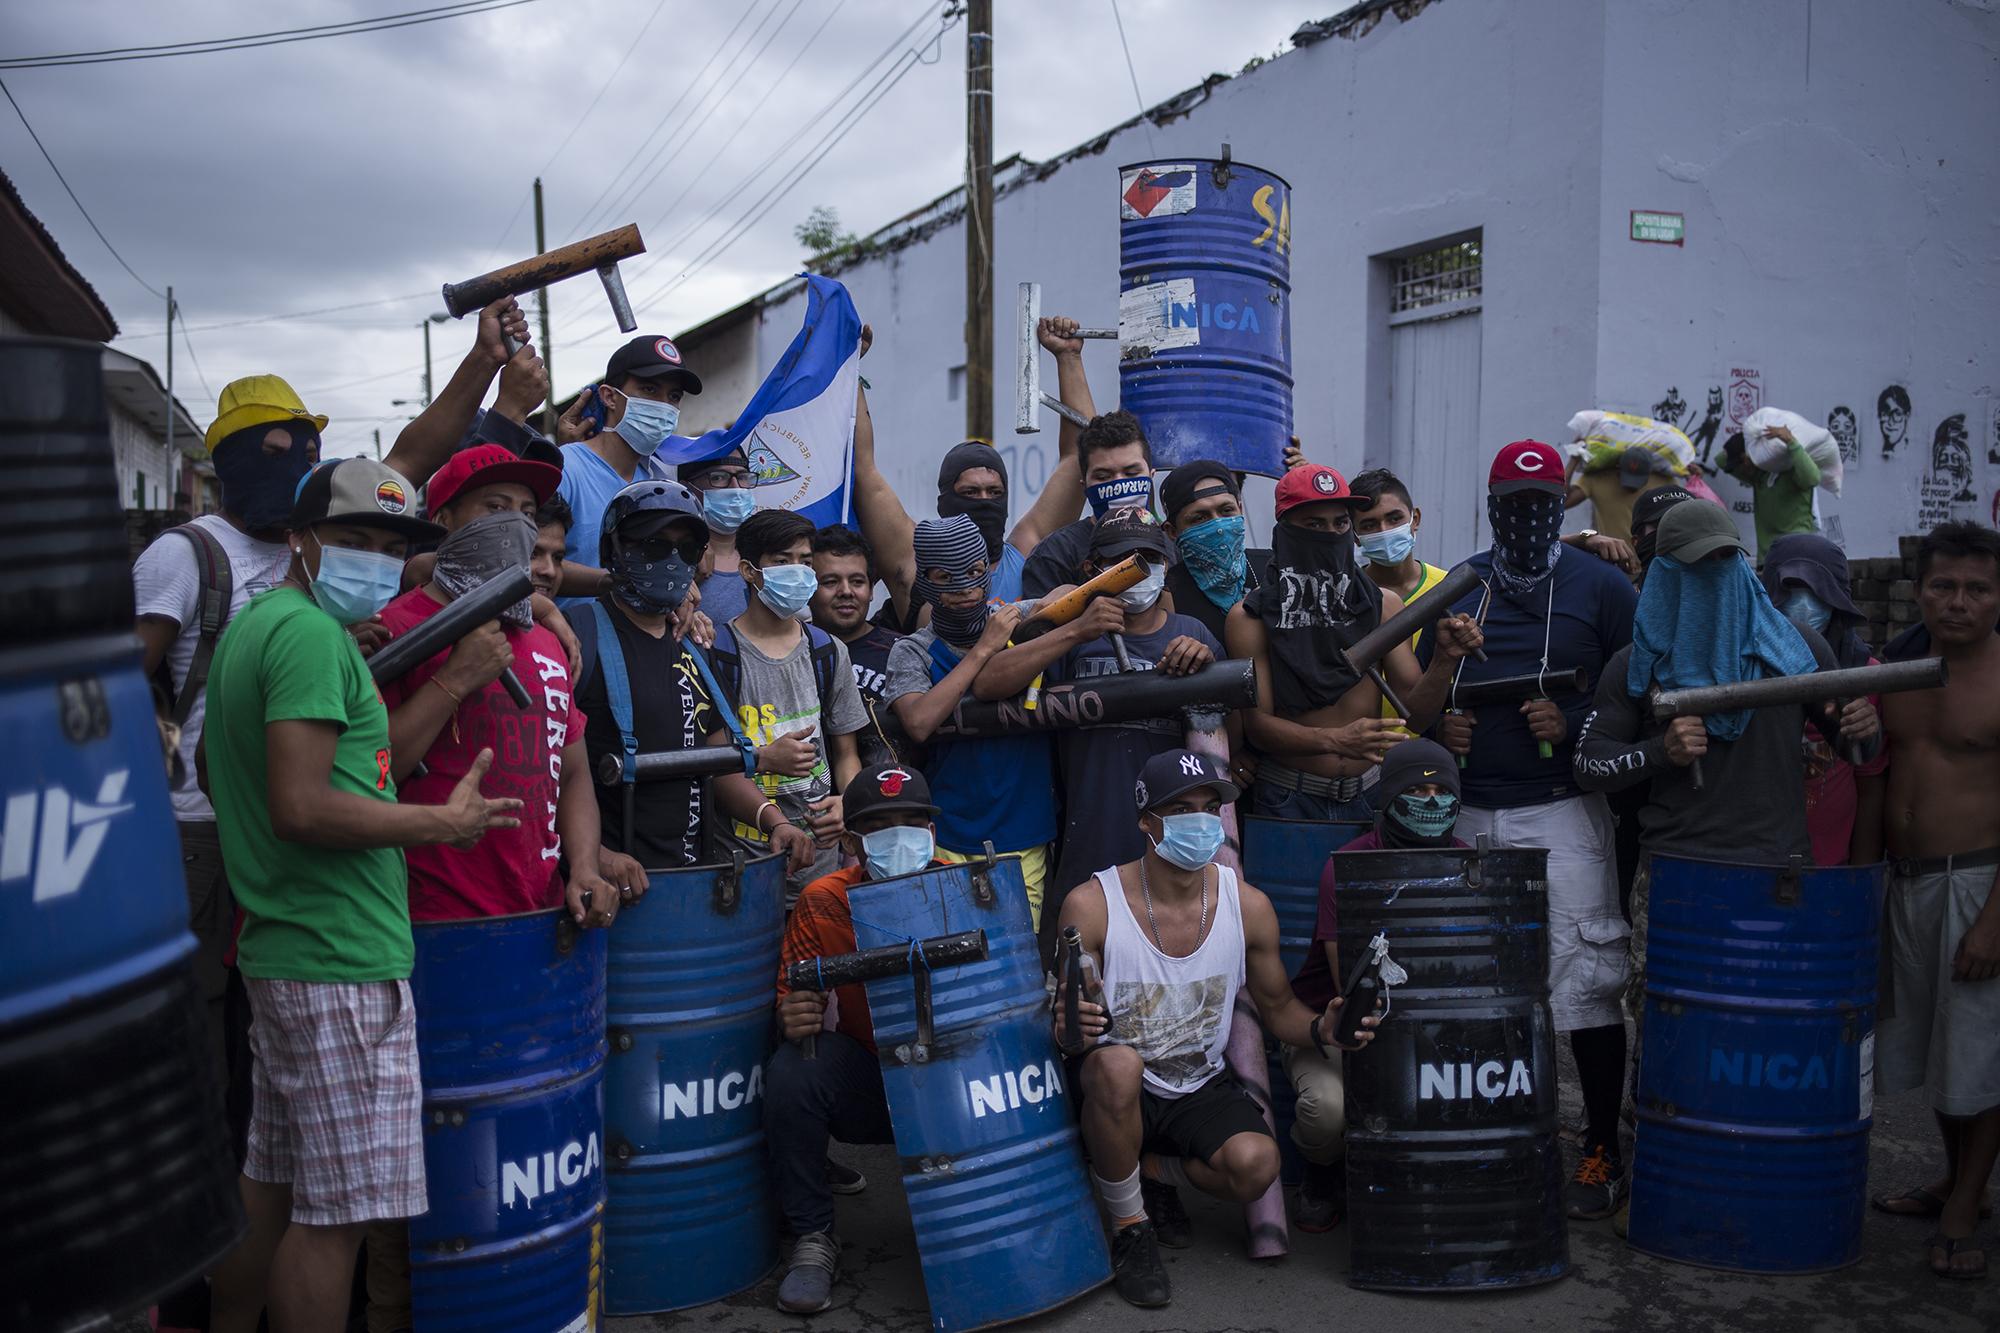 Children and women formed barricades to close access to Masaya. Photo by Víctor Peña. 